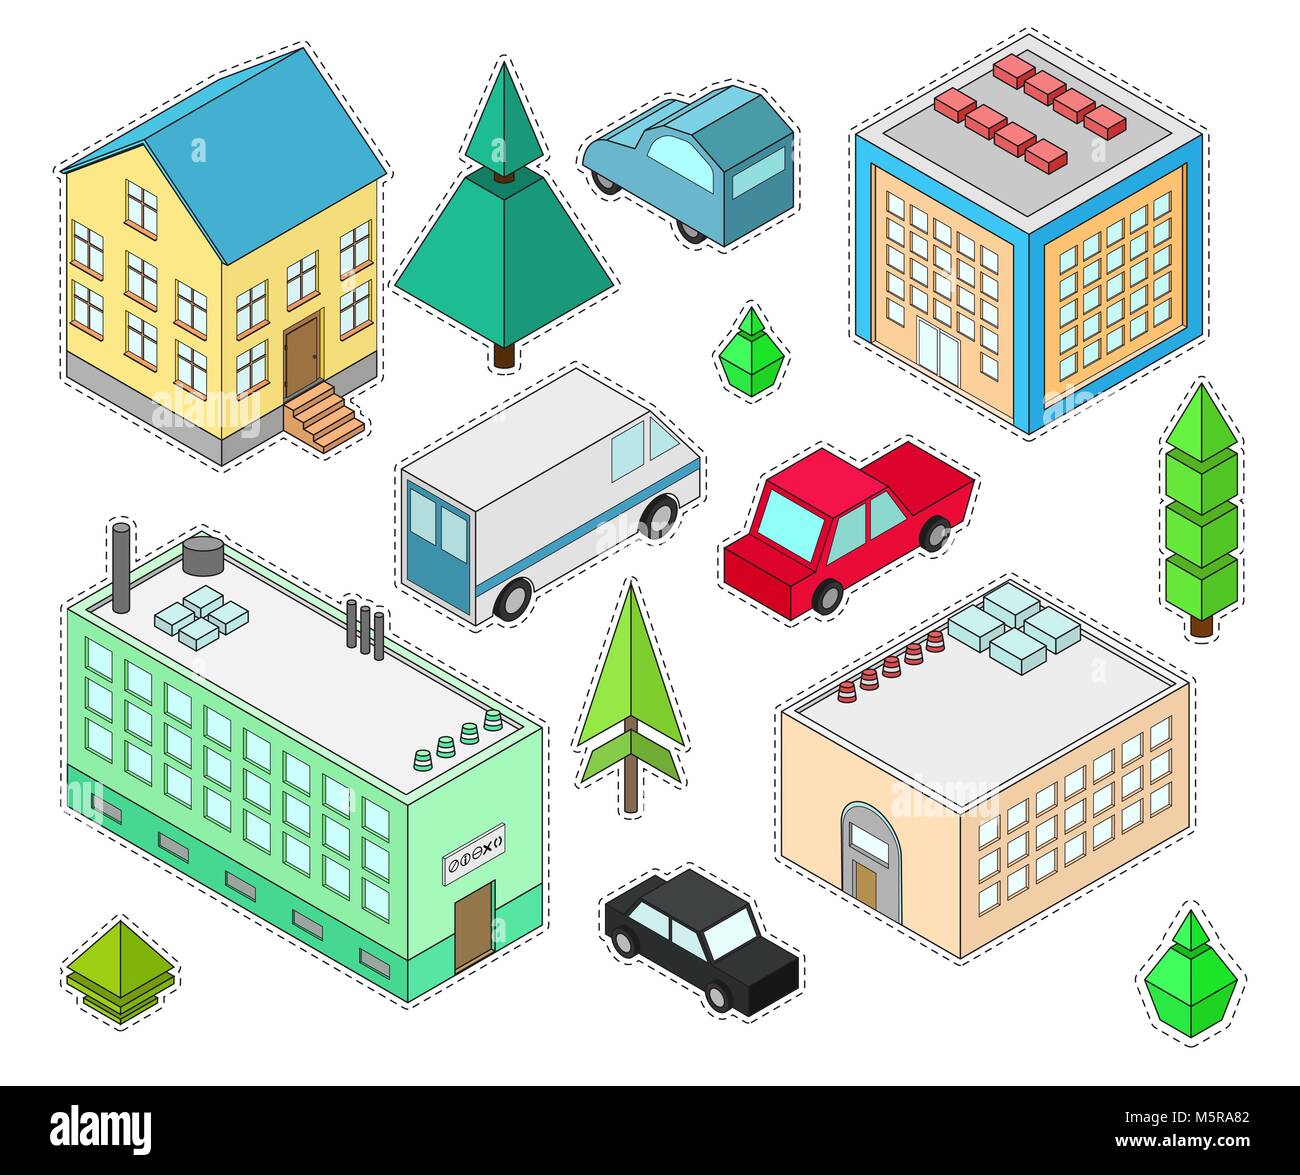 Set of stickers different  isometric buildings. Car, green bushes, tree. Vector illustration isometric style. Stock Vector